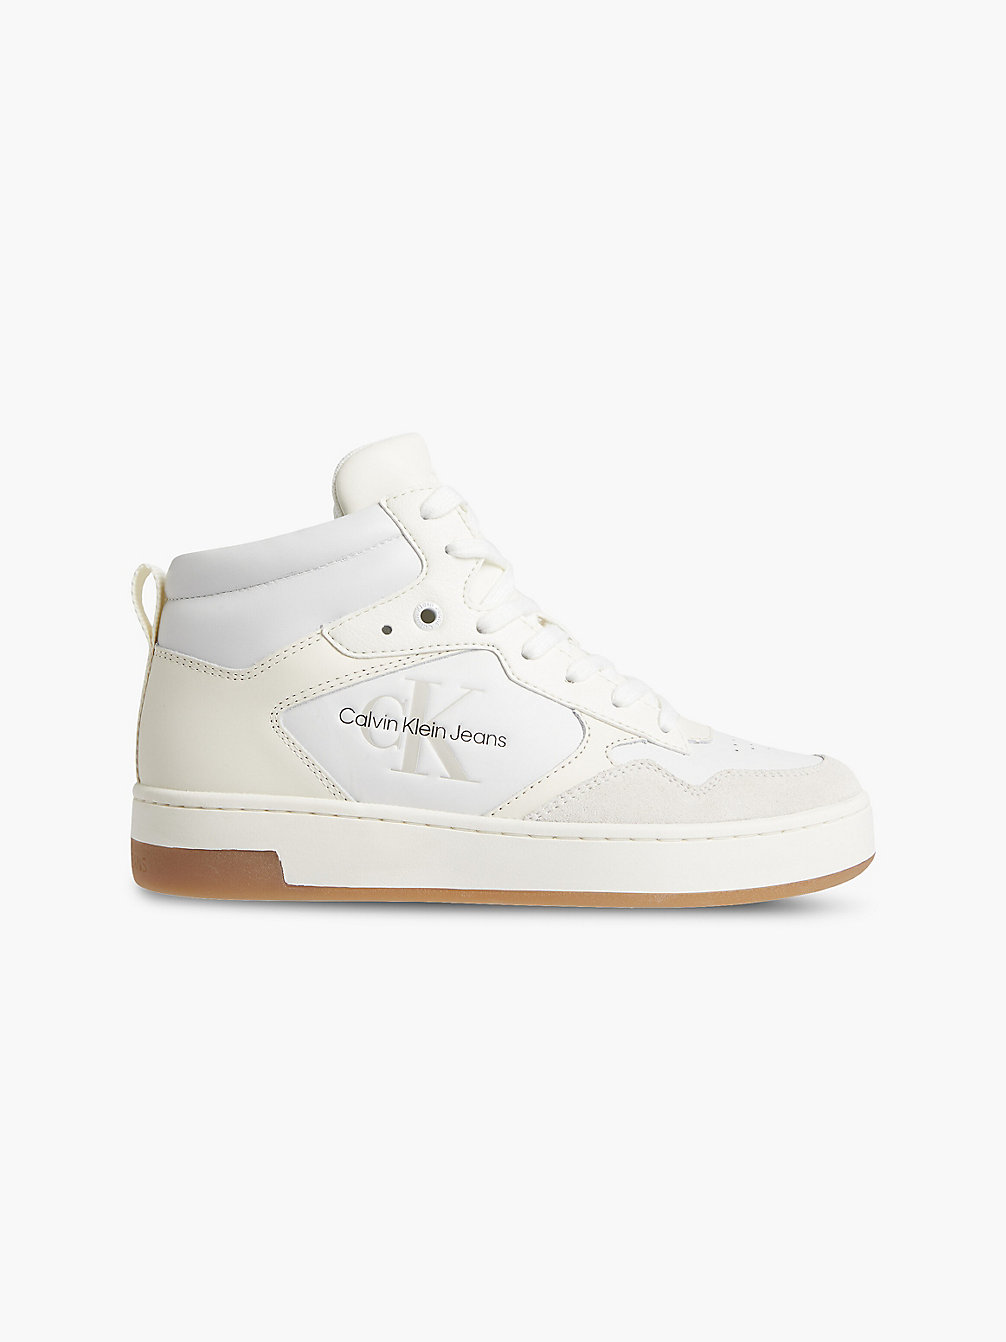 IVORY/BRIGHT WHITE Leather High-Top Trainers undefined women Calvin Klein